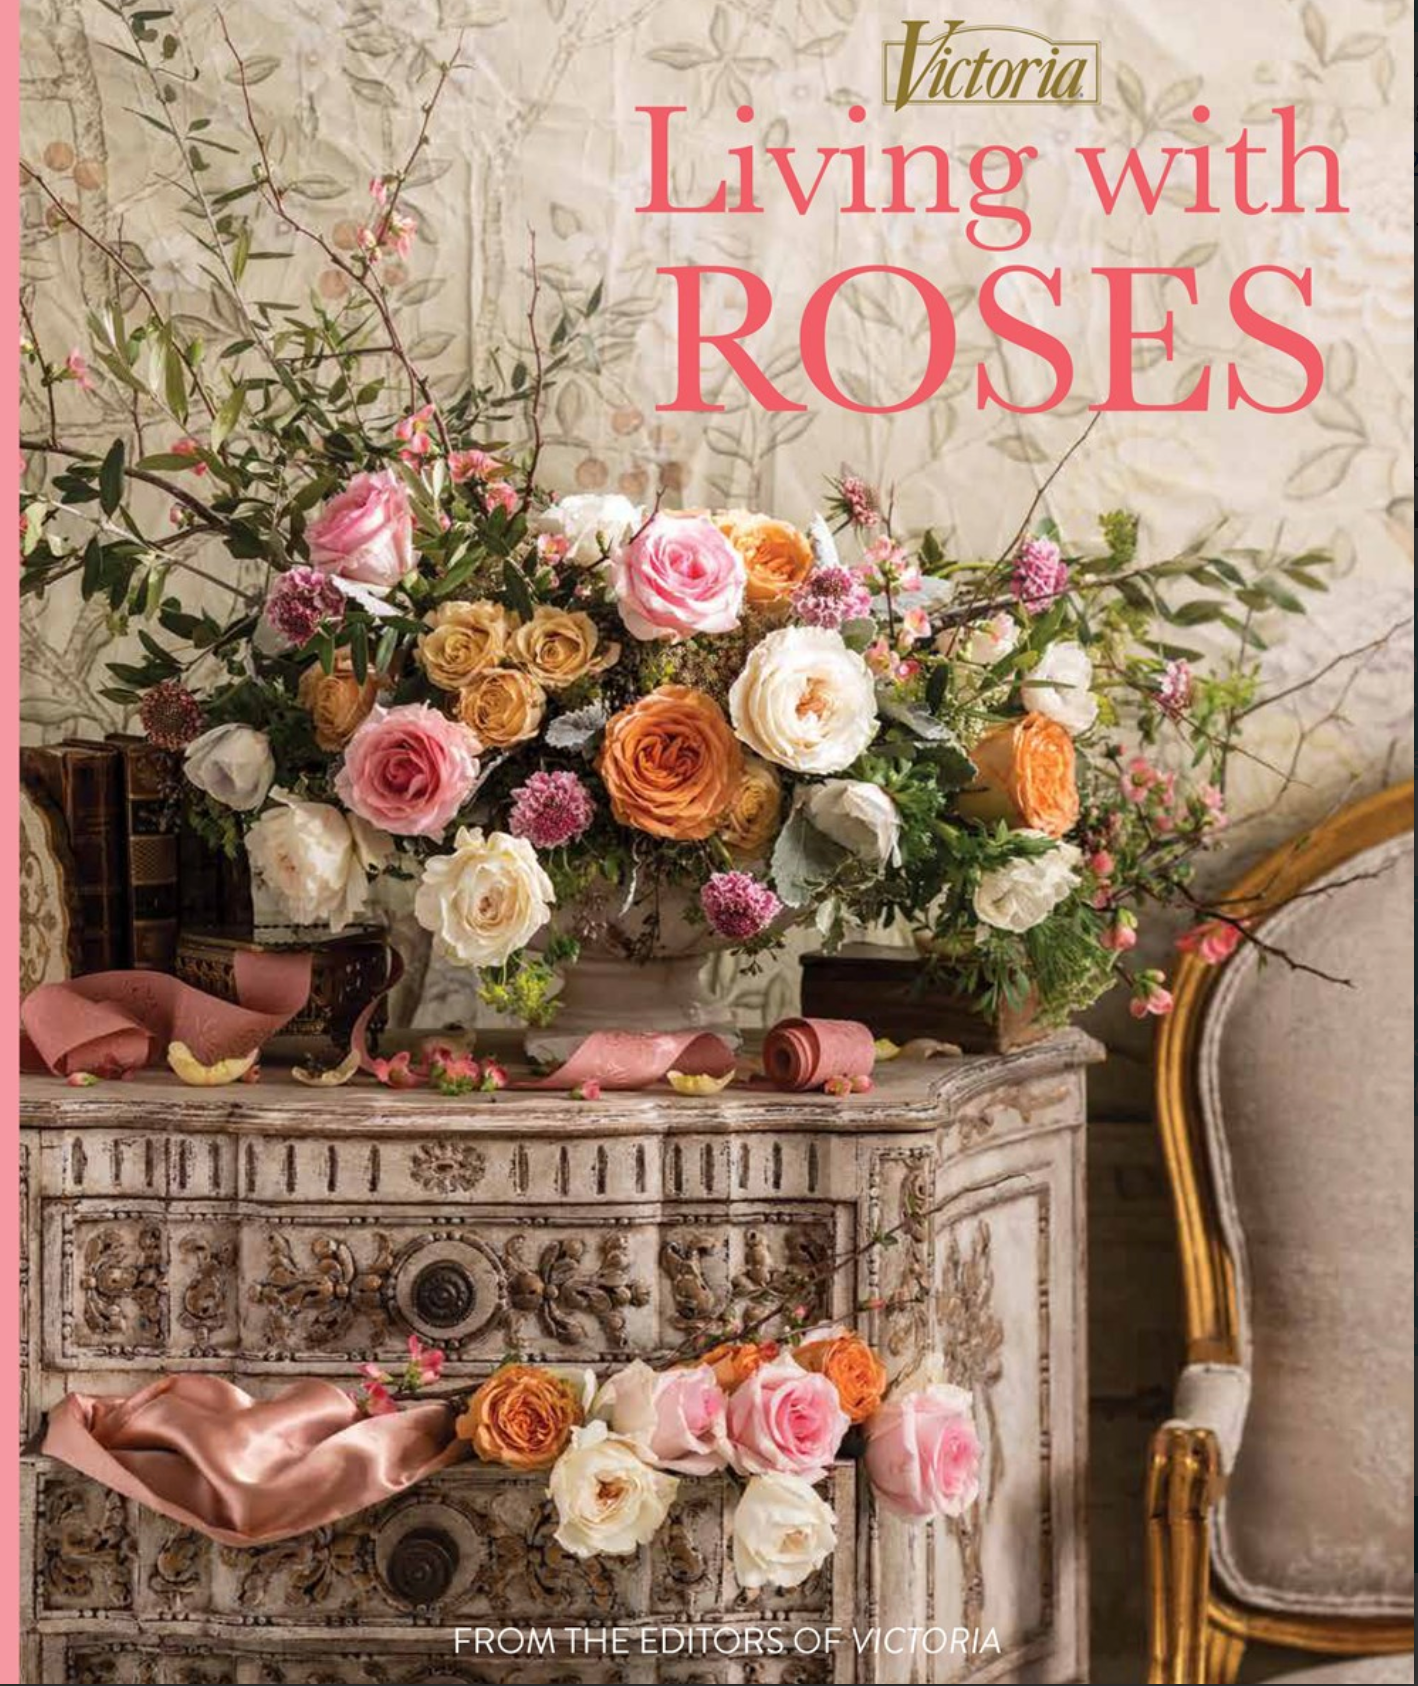 Victoria Living with Roses